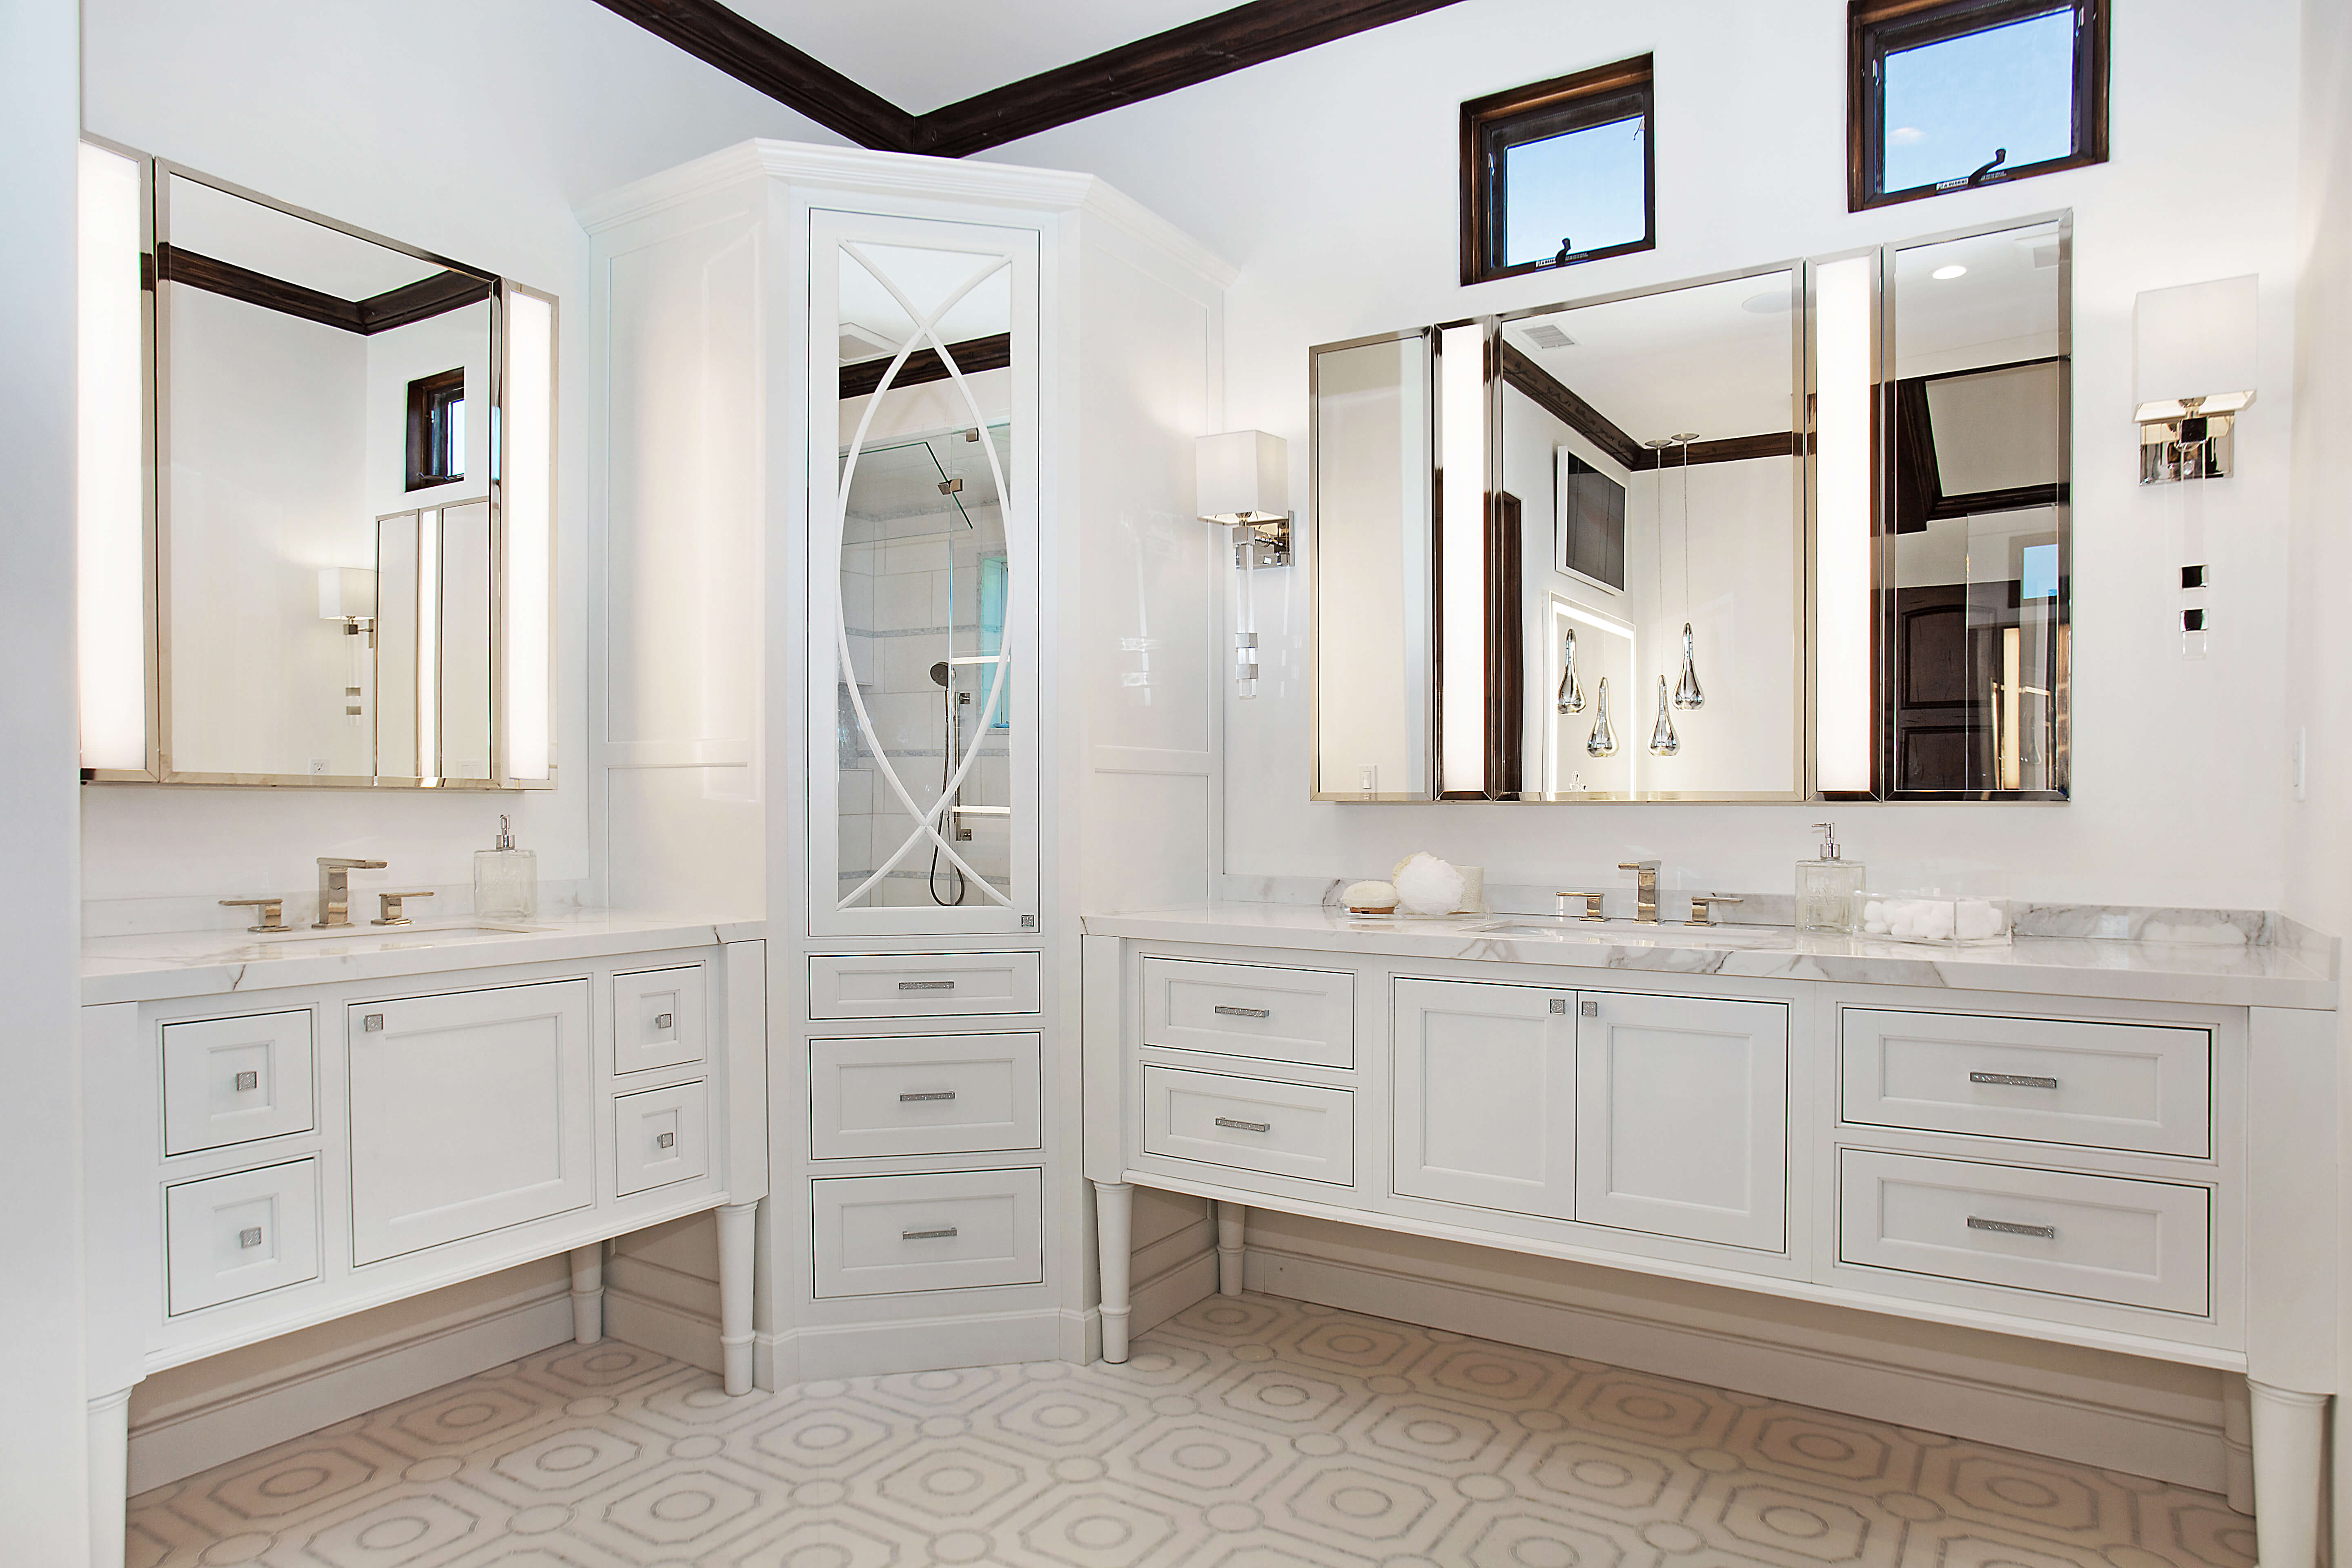 A corner double vanity with dual sinks on opposite separate walls. A tall mirrored linen cabinet sits in the corner dividing the two vanity spaces.